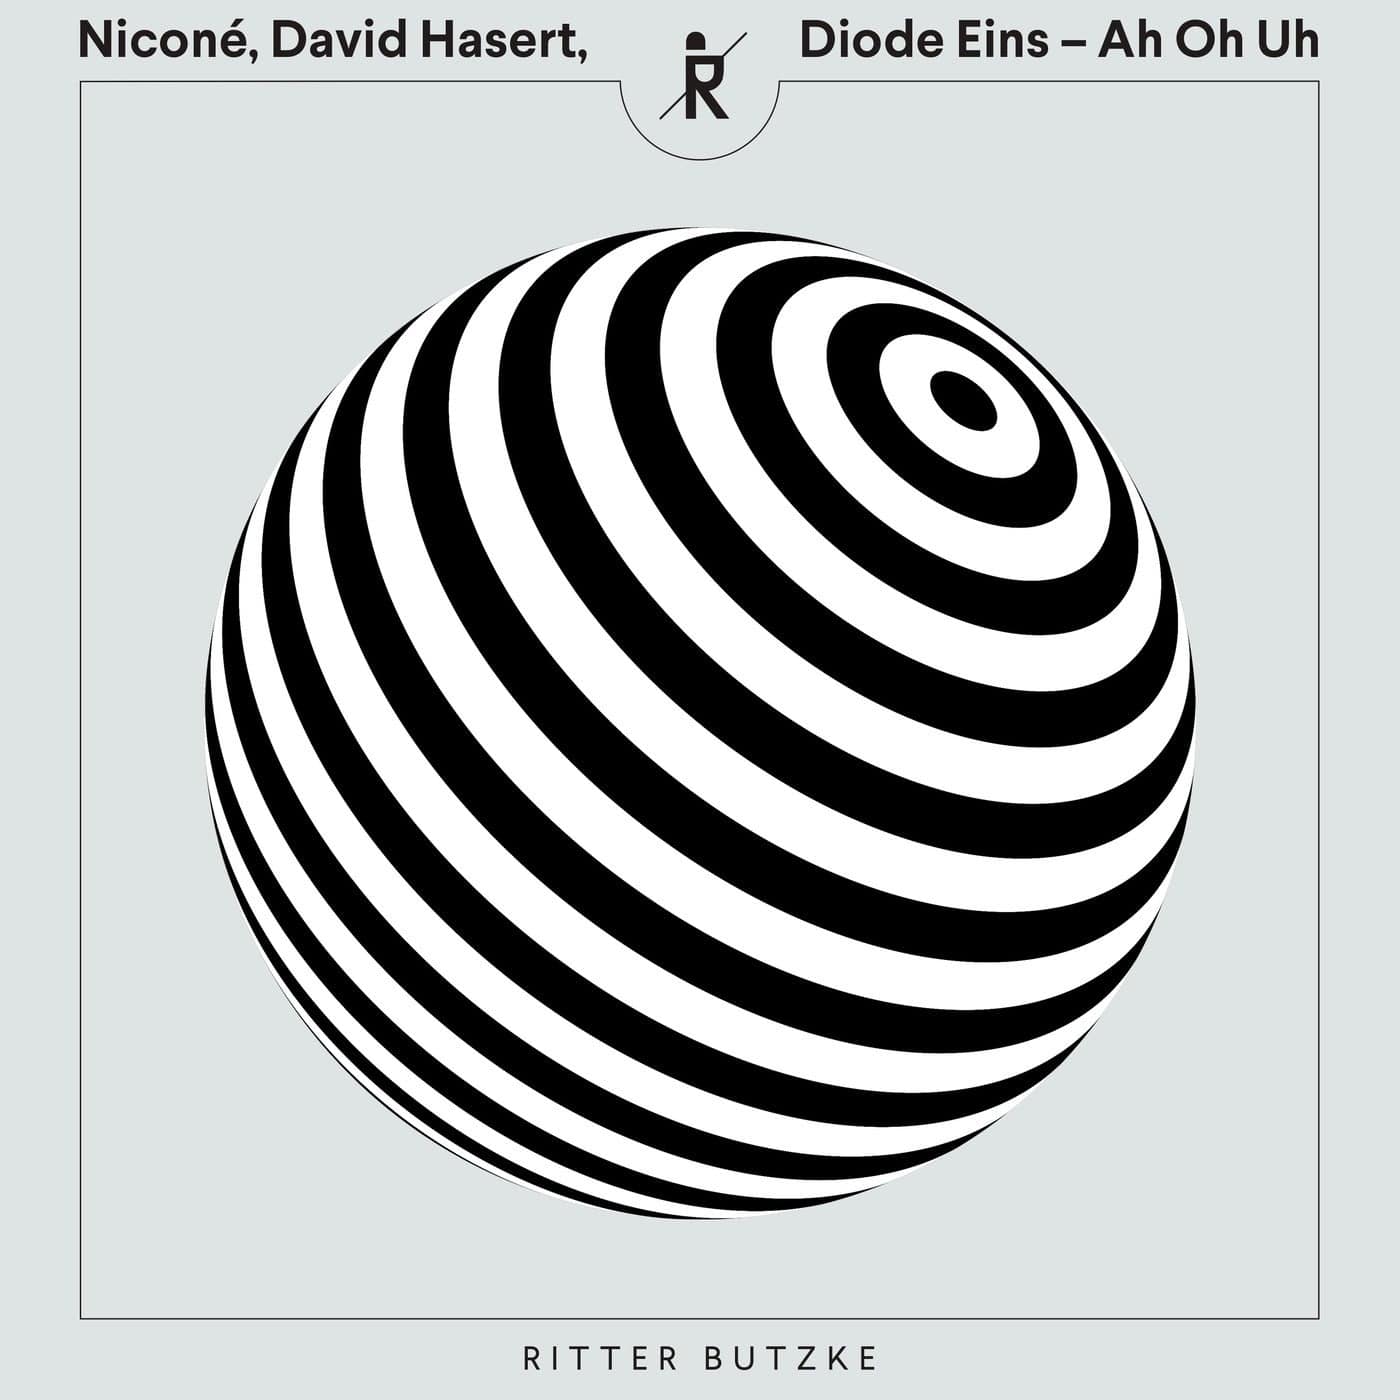 Download Nicone, David Hasert, Diode Eins - Ah Oh Uh on Electrobuzz